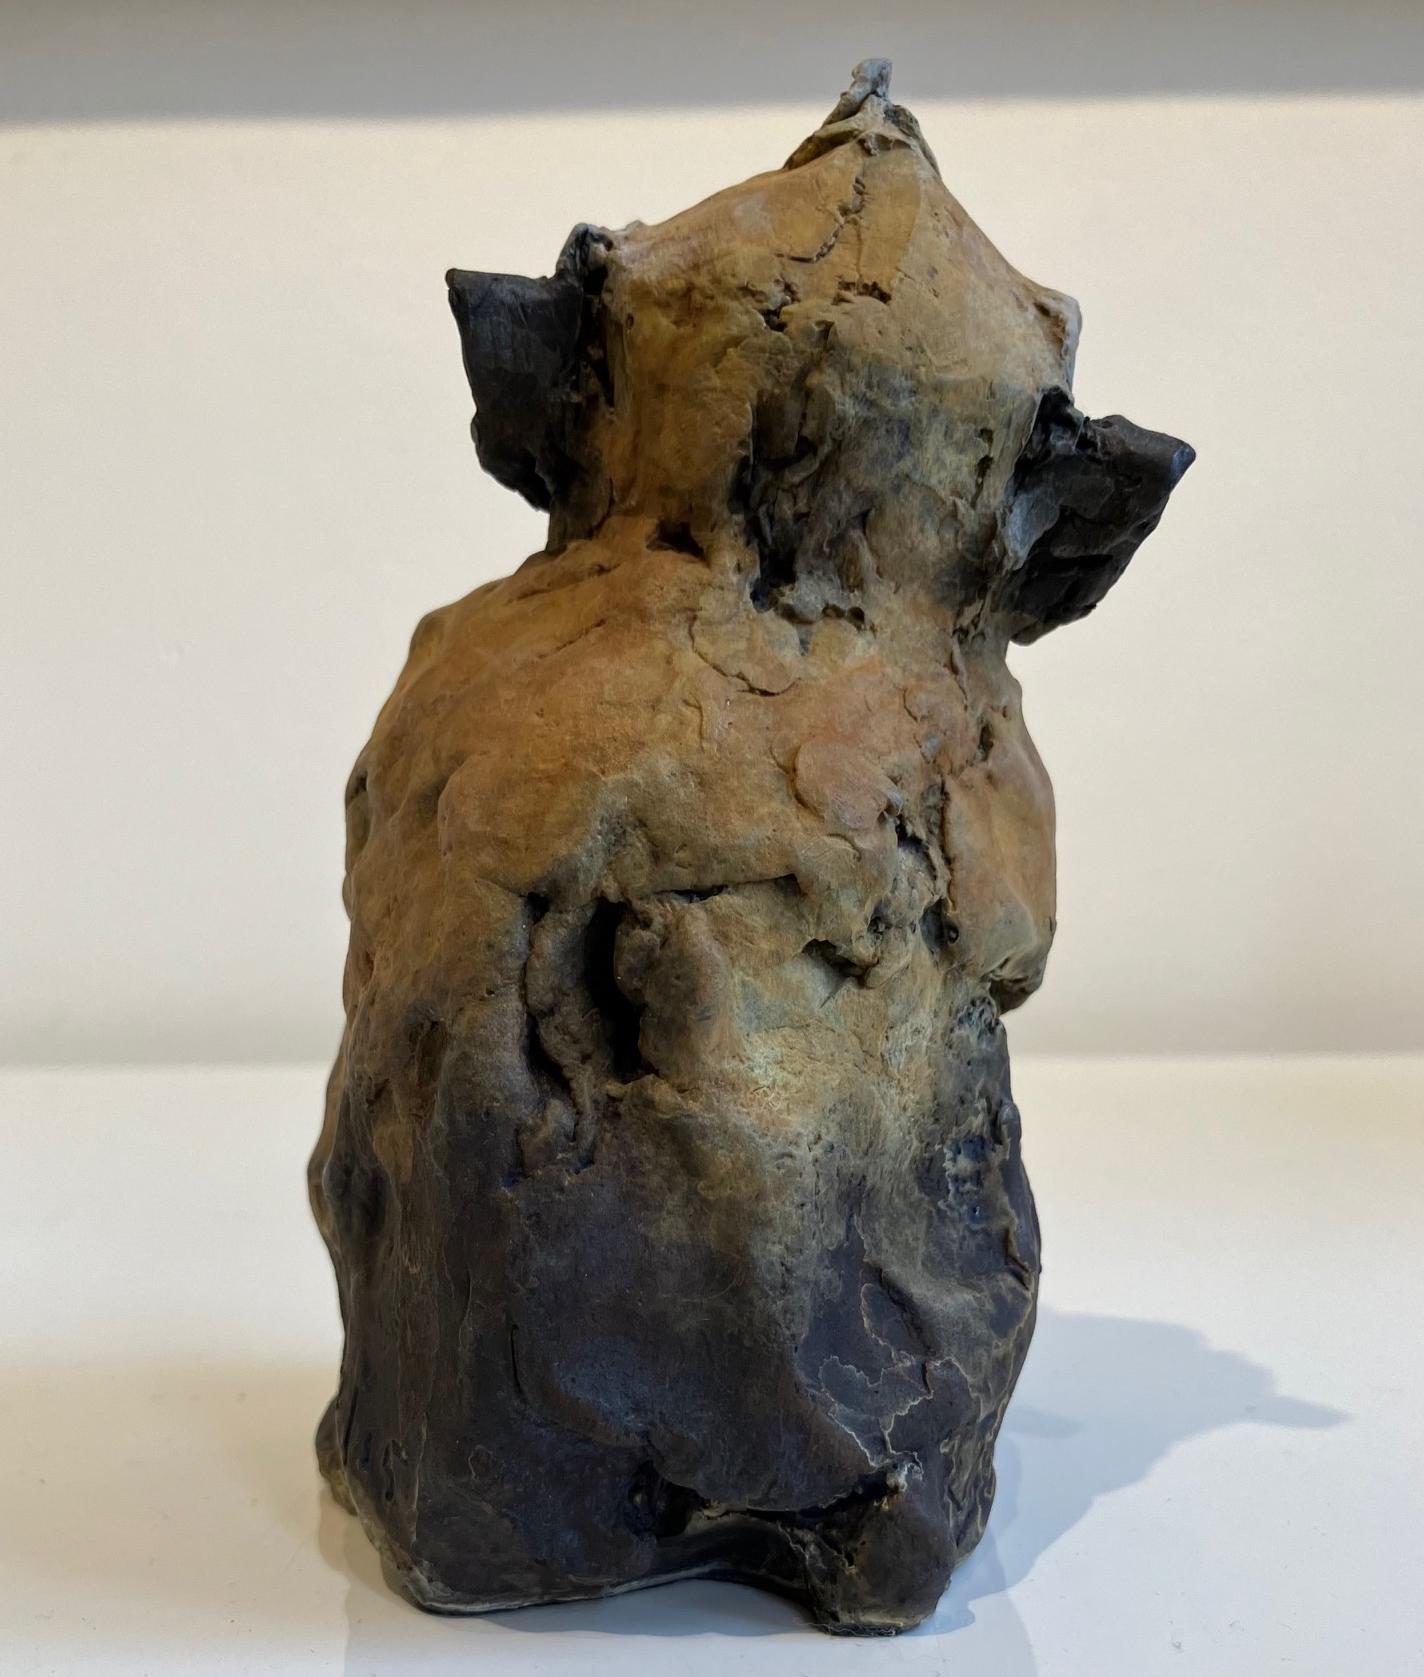 Nichola Theakston (1967) has established herself as one of the UK’s foremost contemporary sculptors working within the animal genre. 

With the ''Monkey Sketch 4'' Nichola shows how exquisite she can capture the feelings and expressions in an